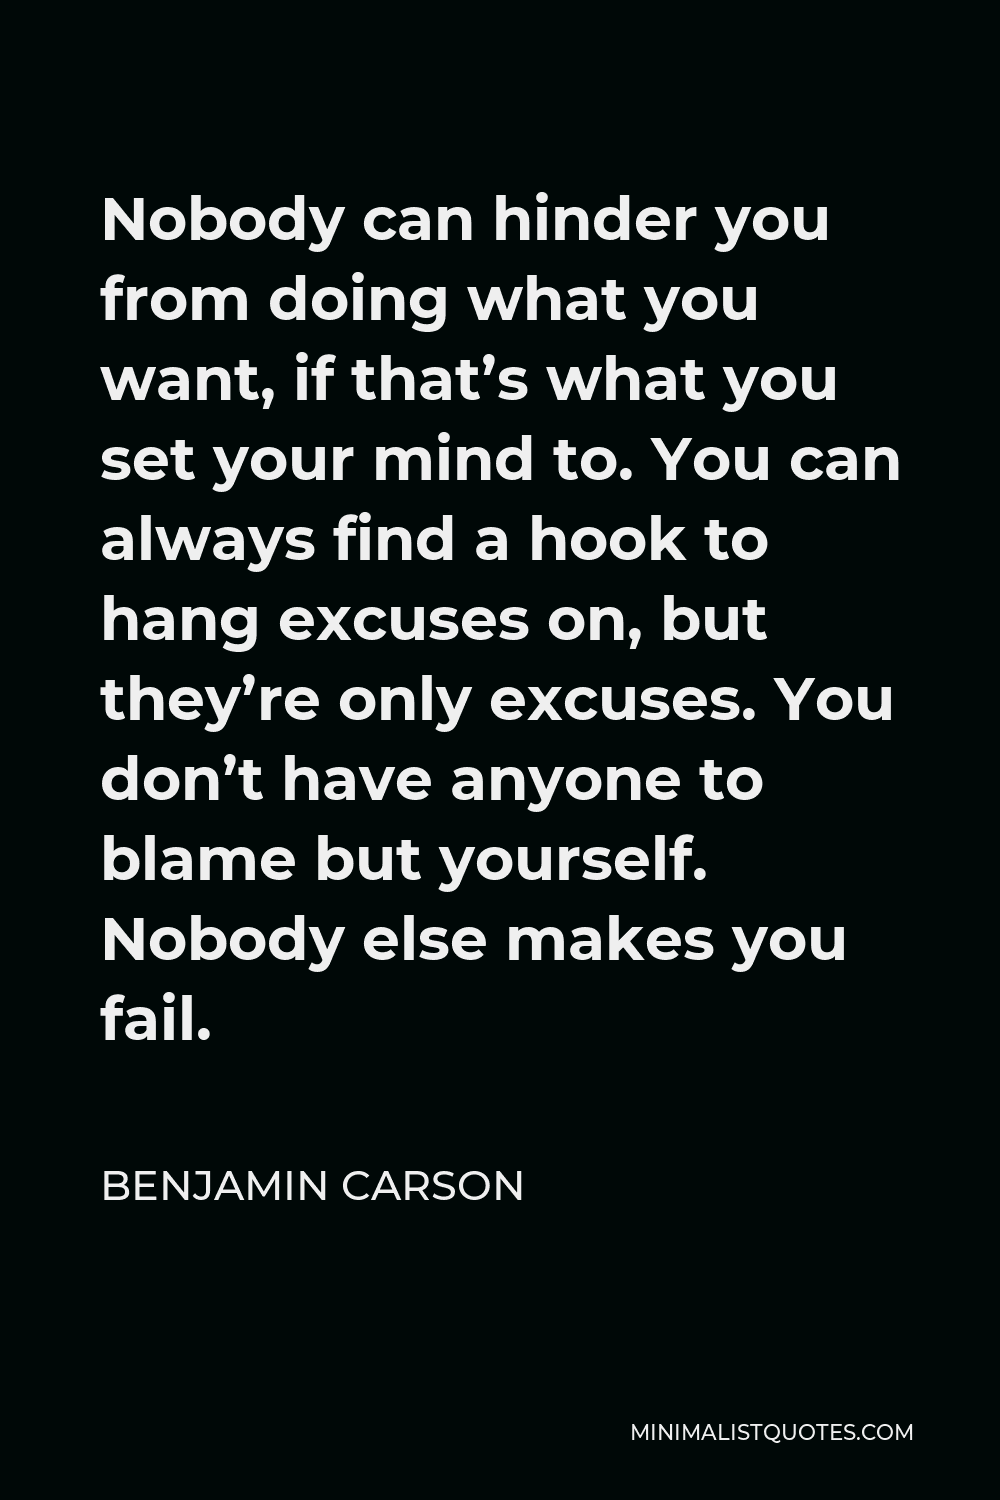 Benjamin Carson Quote - Nobody can hinder you from doing what you want, if that’s what you set your mind to. You can always find a hook to hang excuses on, but they’re only excuses. You don’t have anyone to blame but yourself. Nobody else makes you fail.